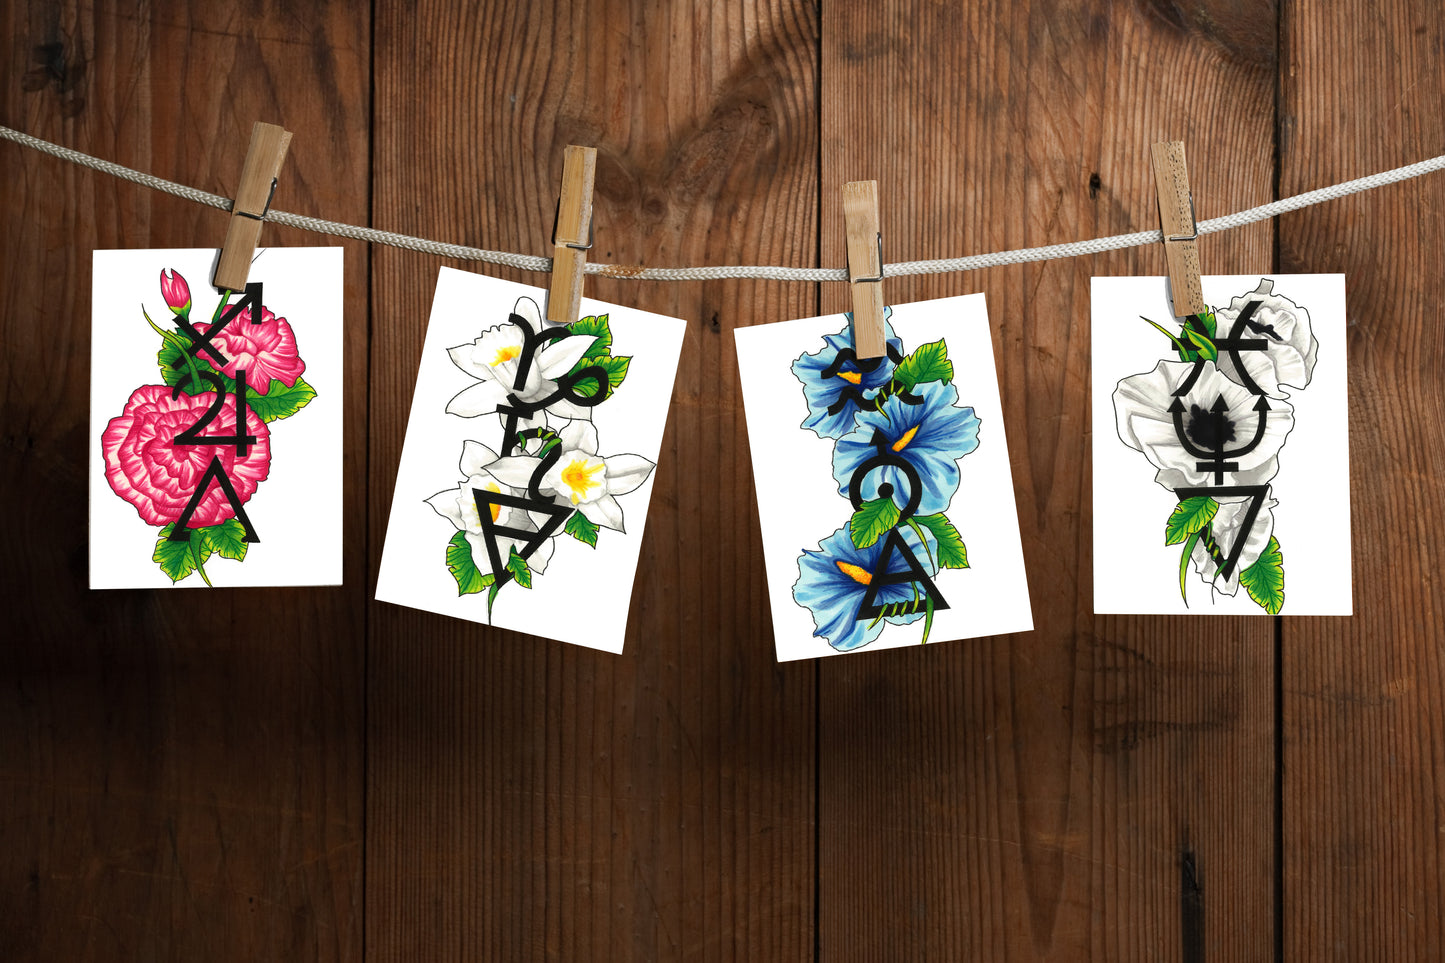 Full Collection of Zodiac Symbol and Floral Prints (12 x A6 prints)